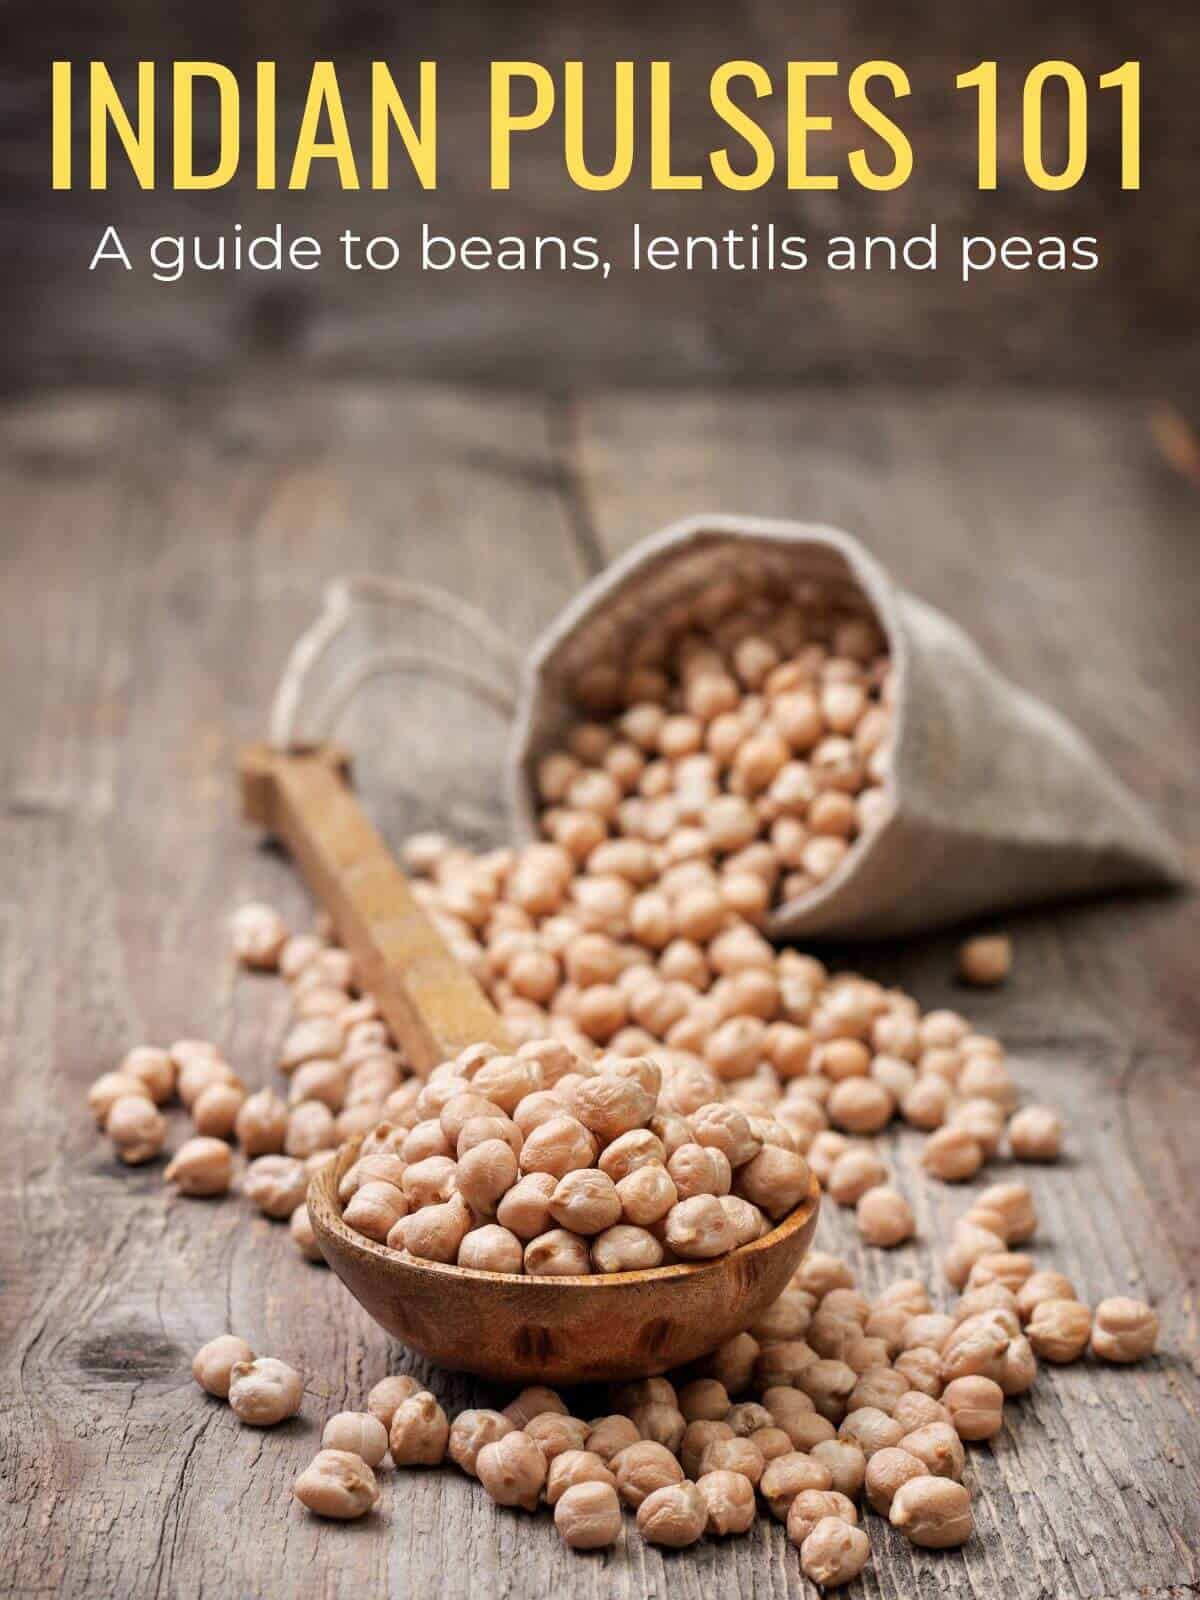 Guide to Indian Pulses